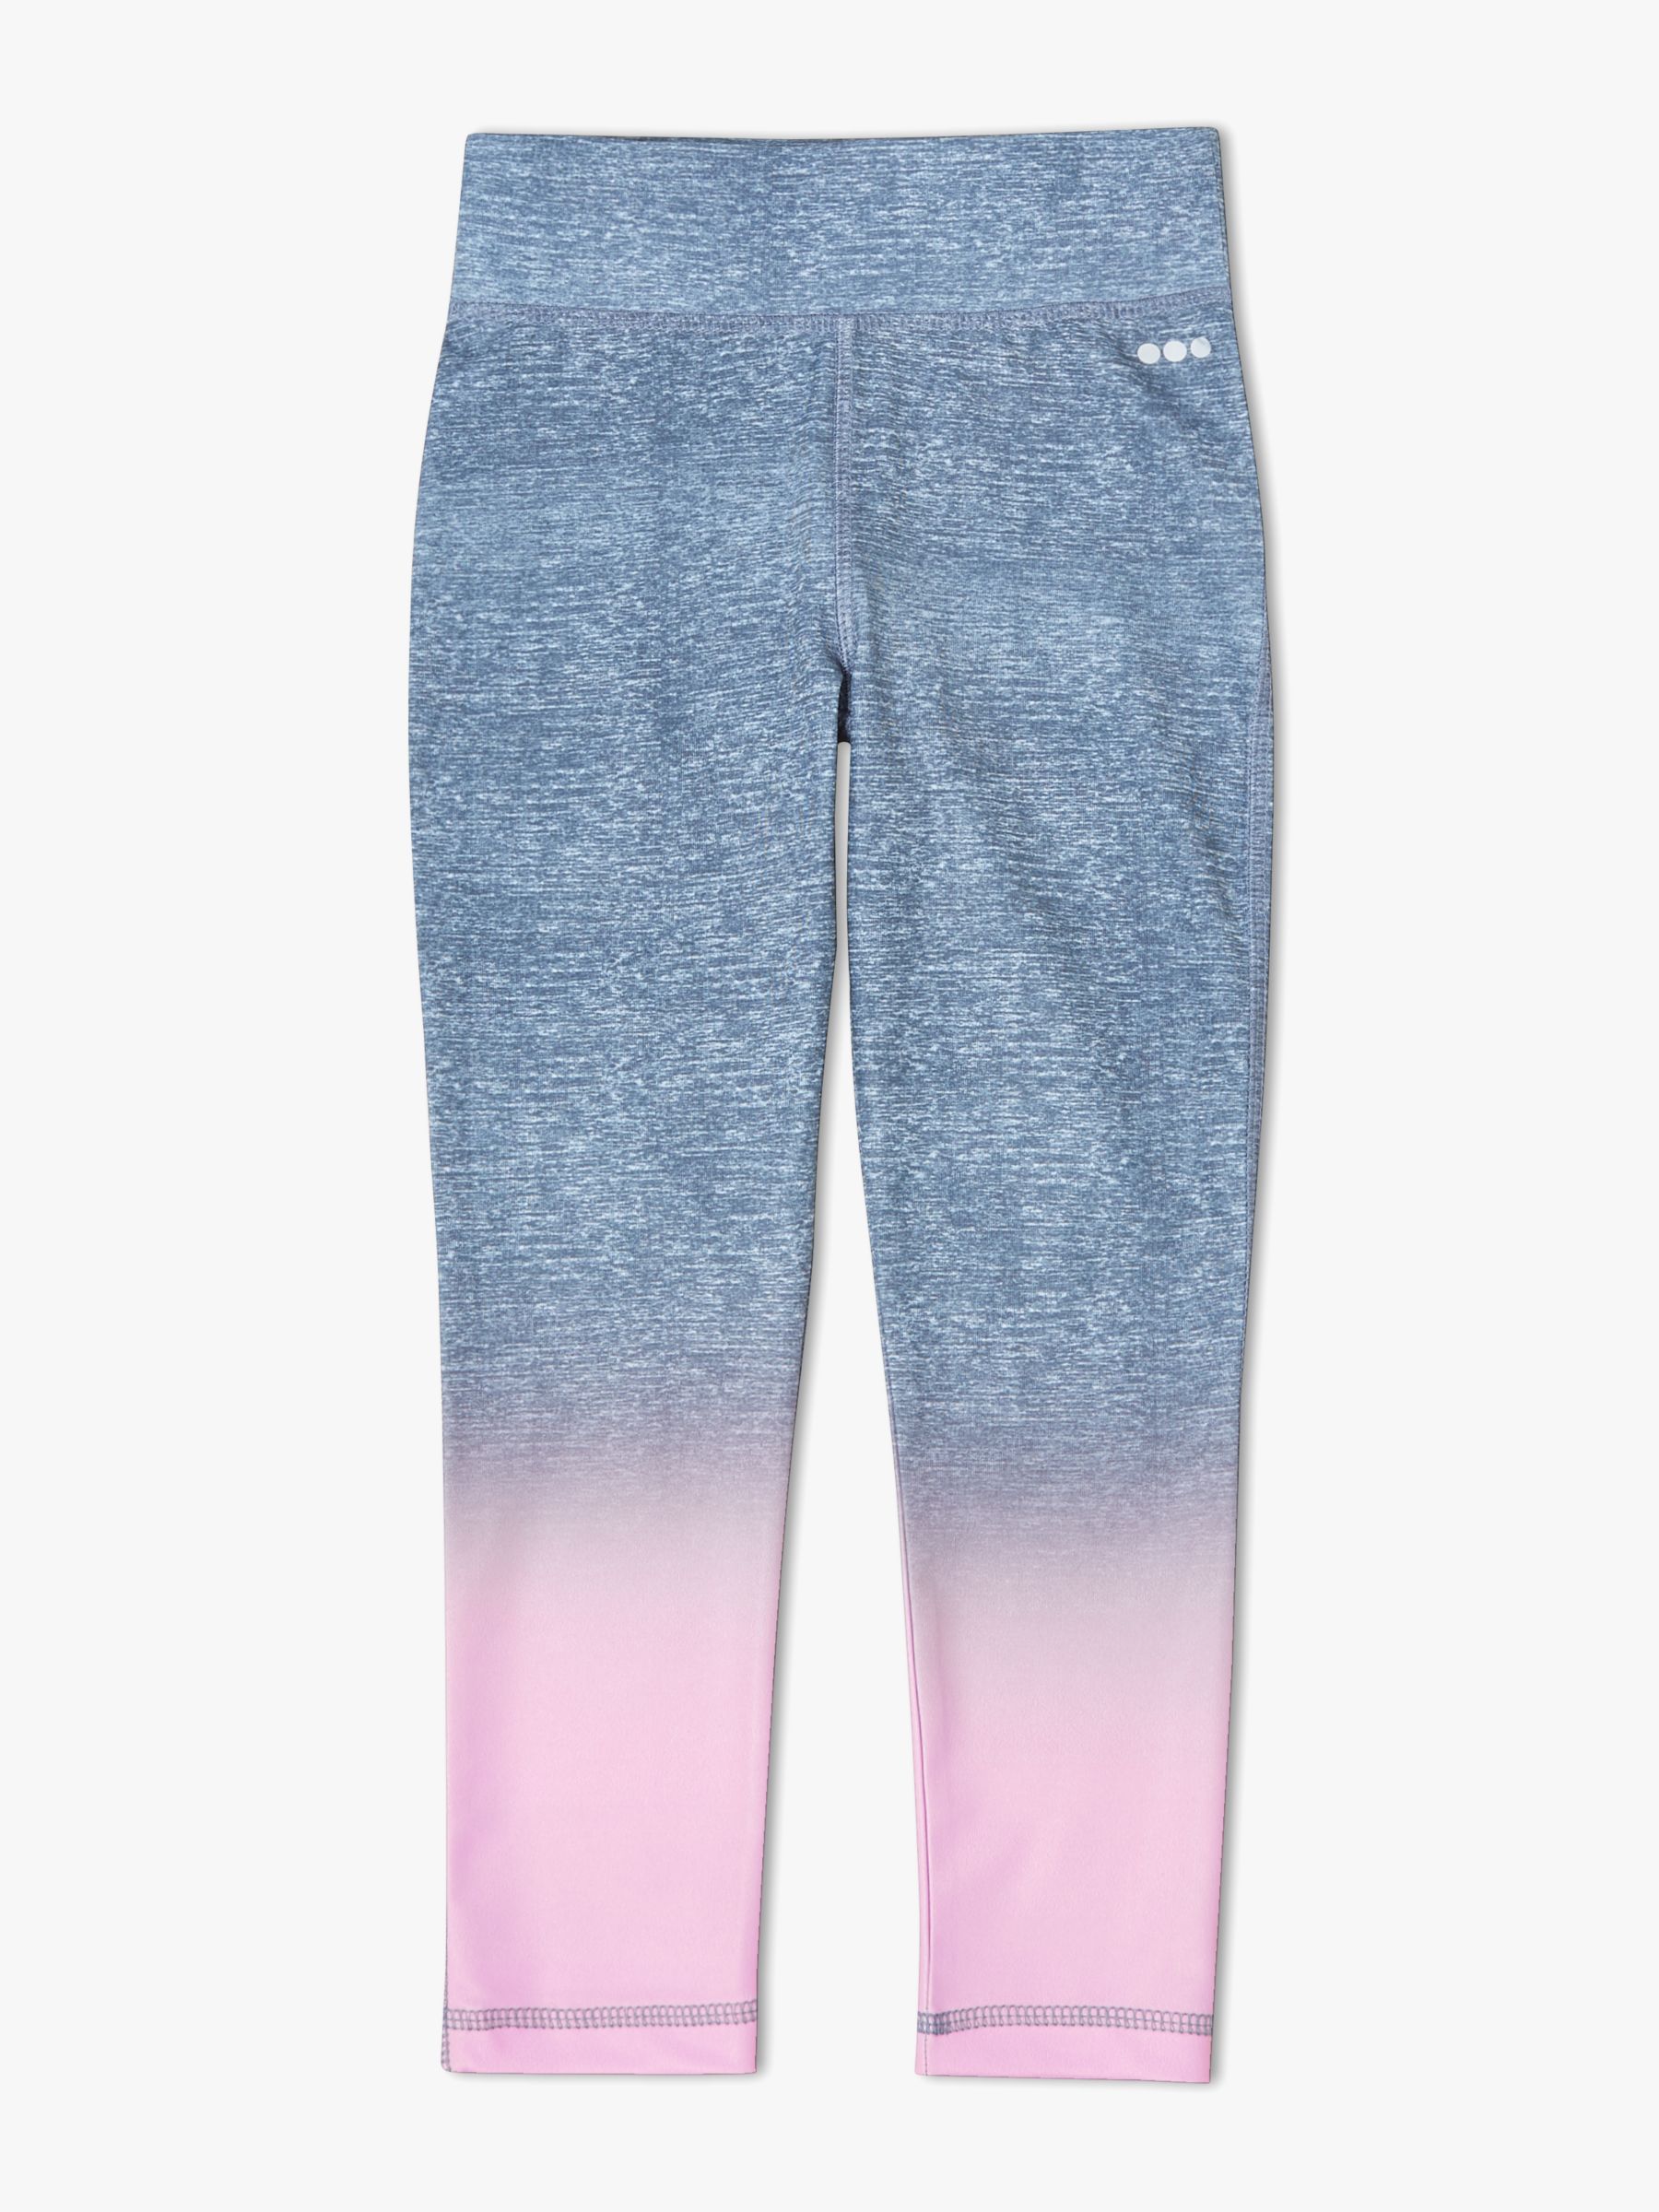 John Lewis & Partners Girls' Ombre Sports Leggings, Lilac, 9 years